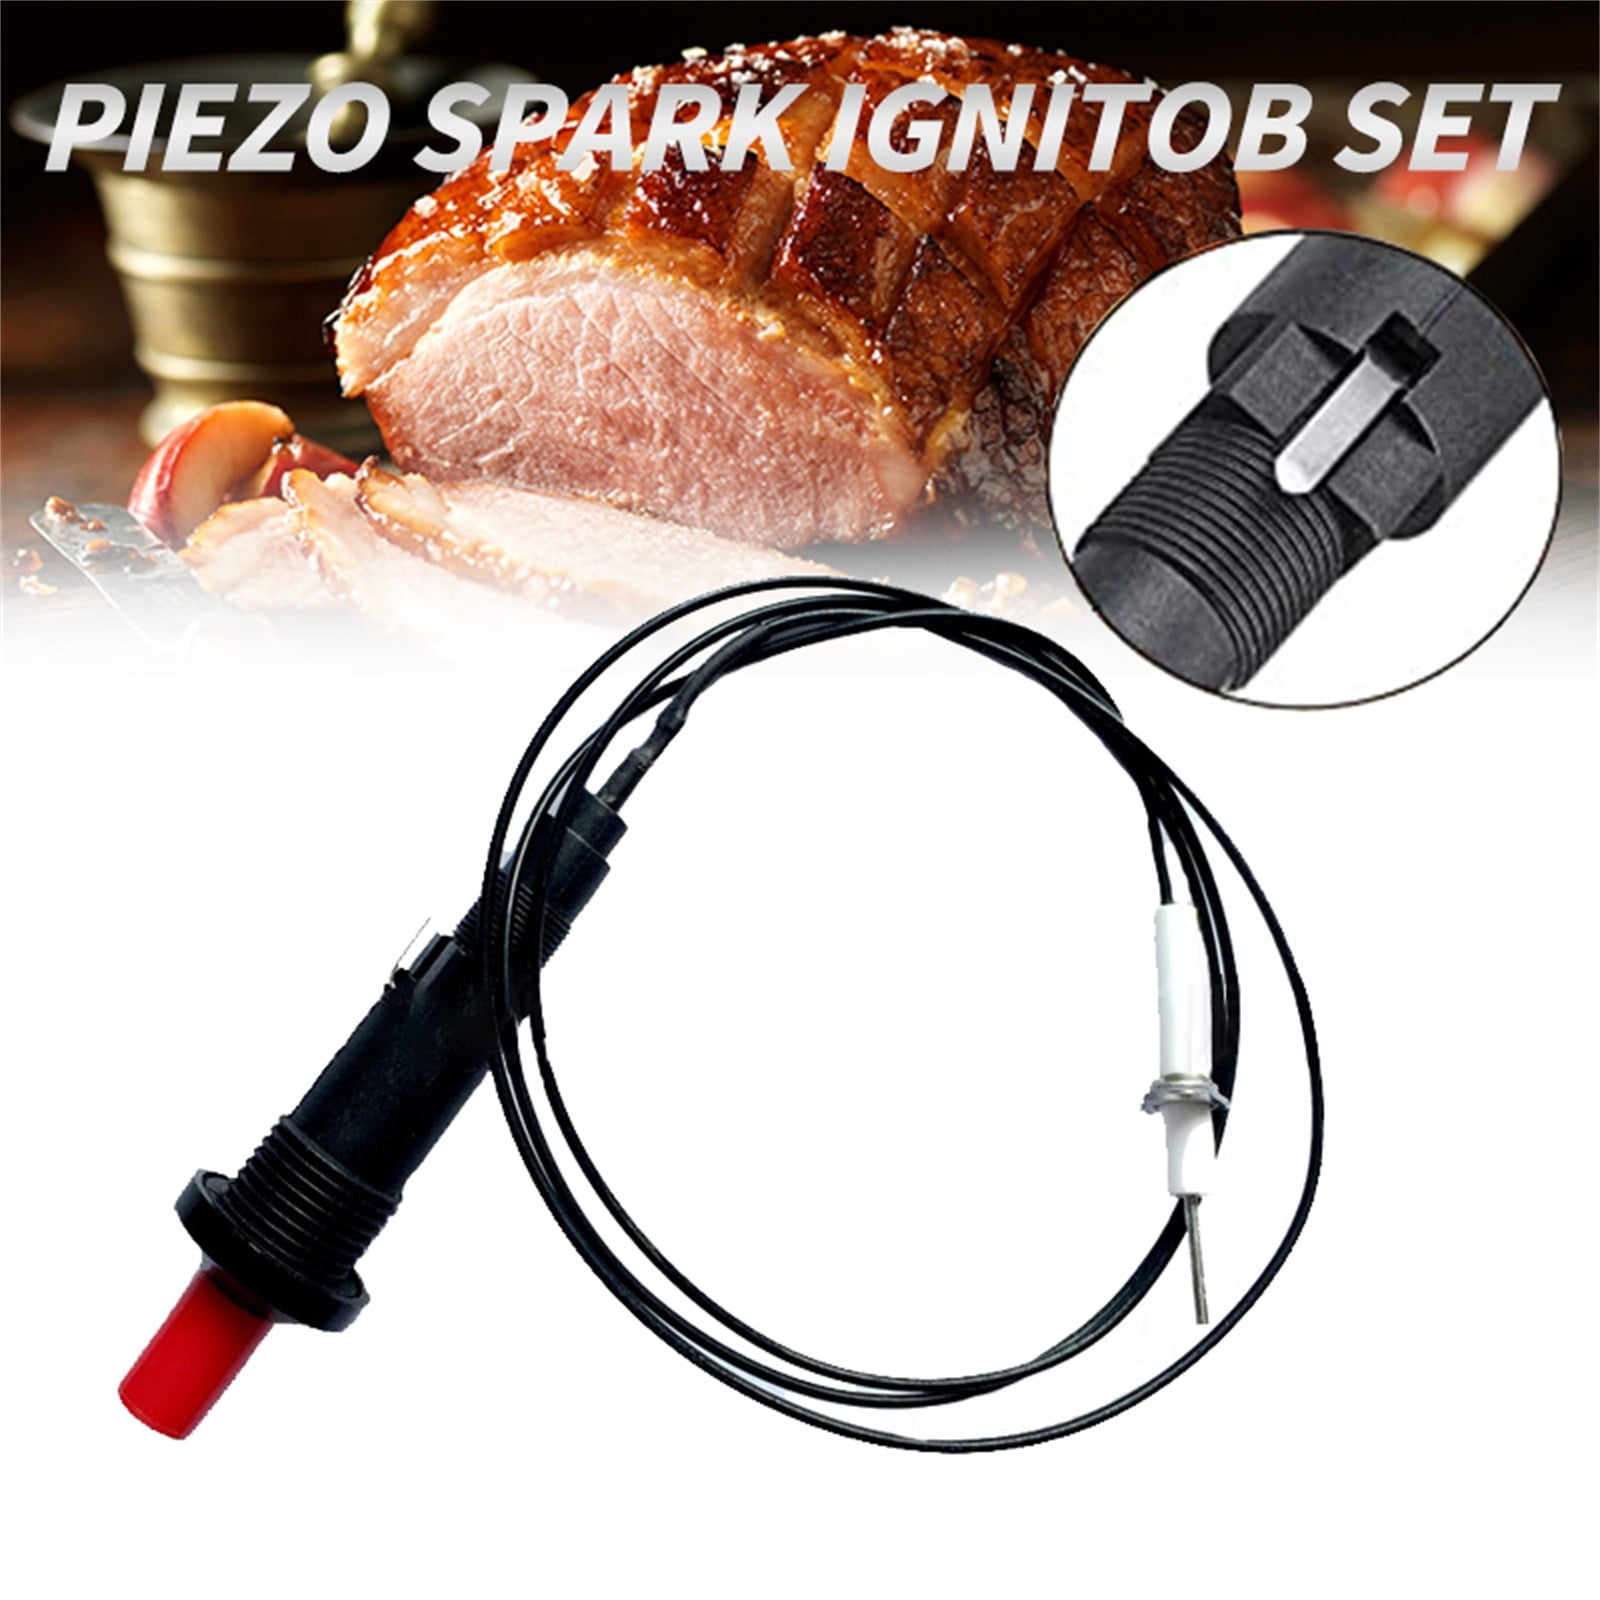 Piezo Spark IGNITOR Generator 2 Outlet Outdoor BBQ Fireplace Heater Burner Stove for sale online 